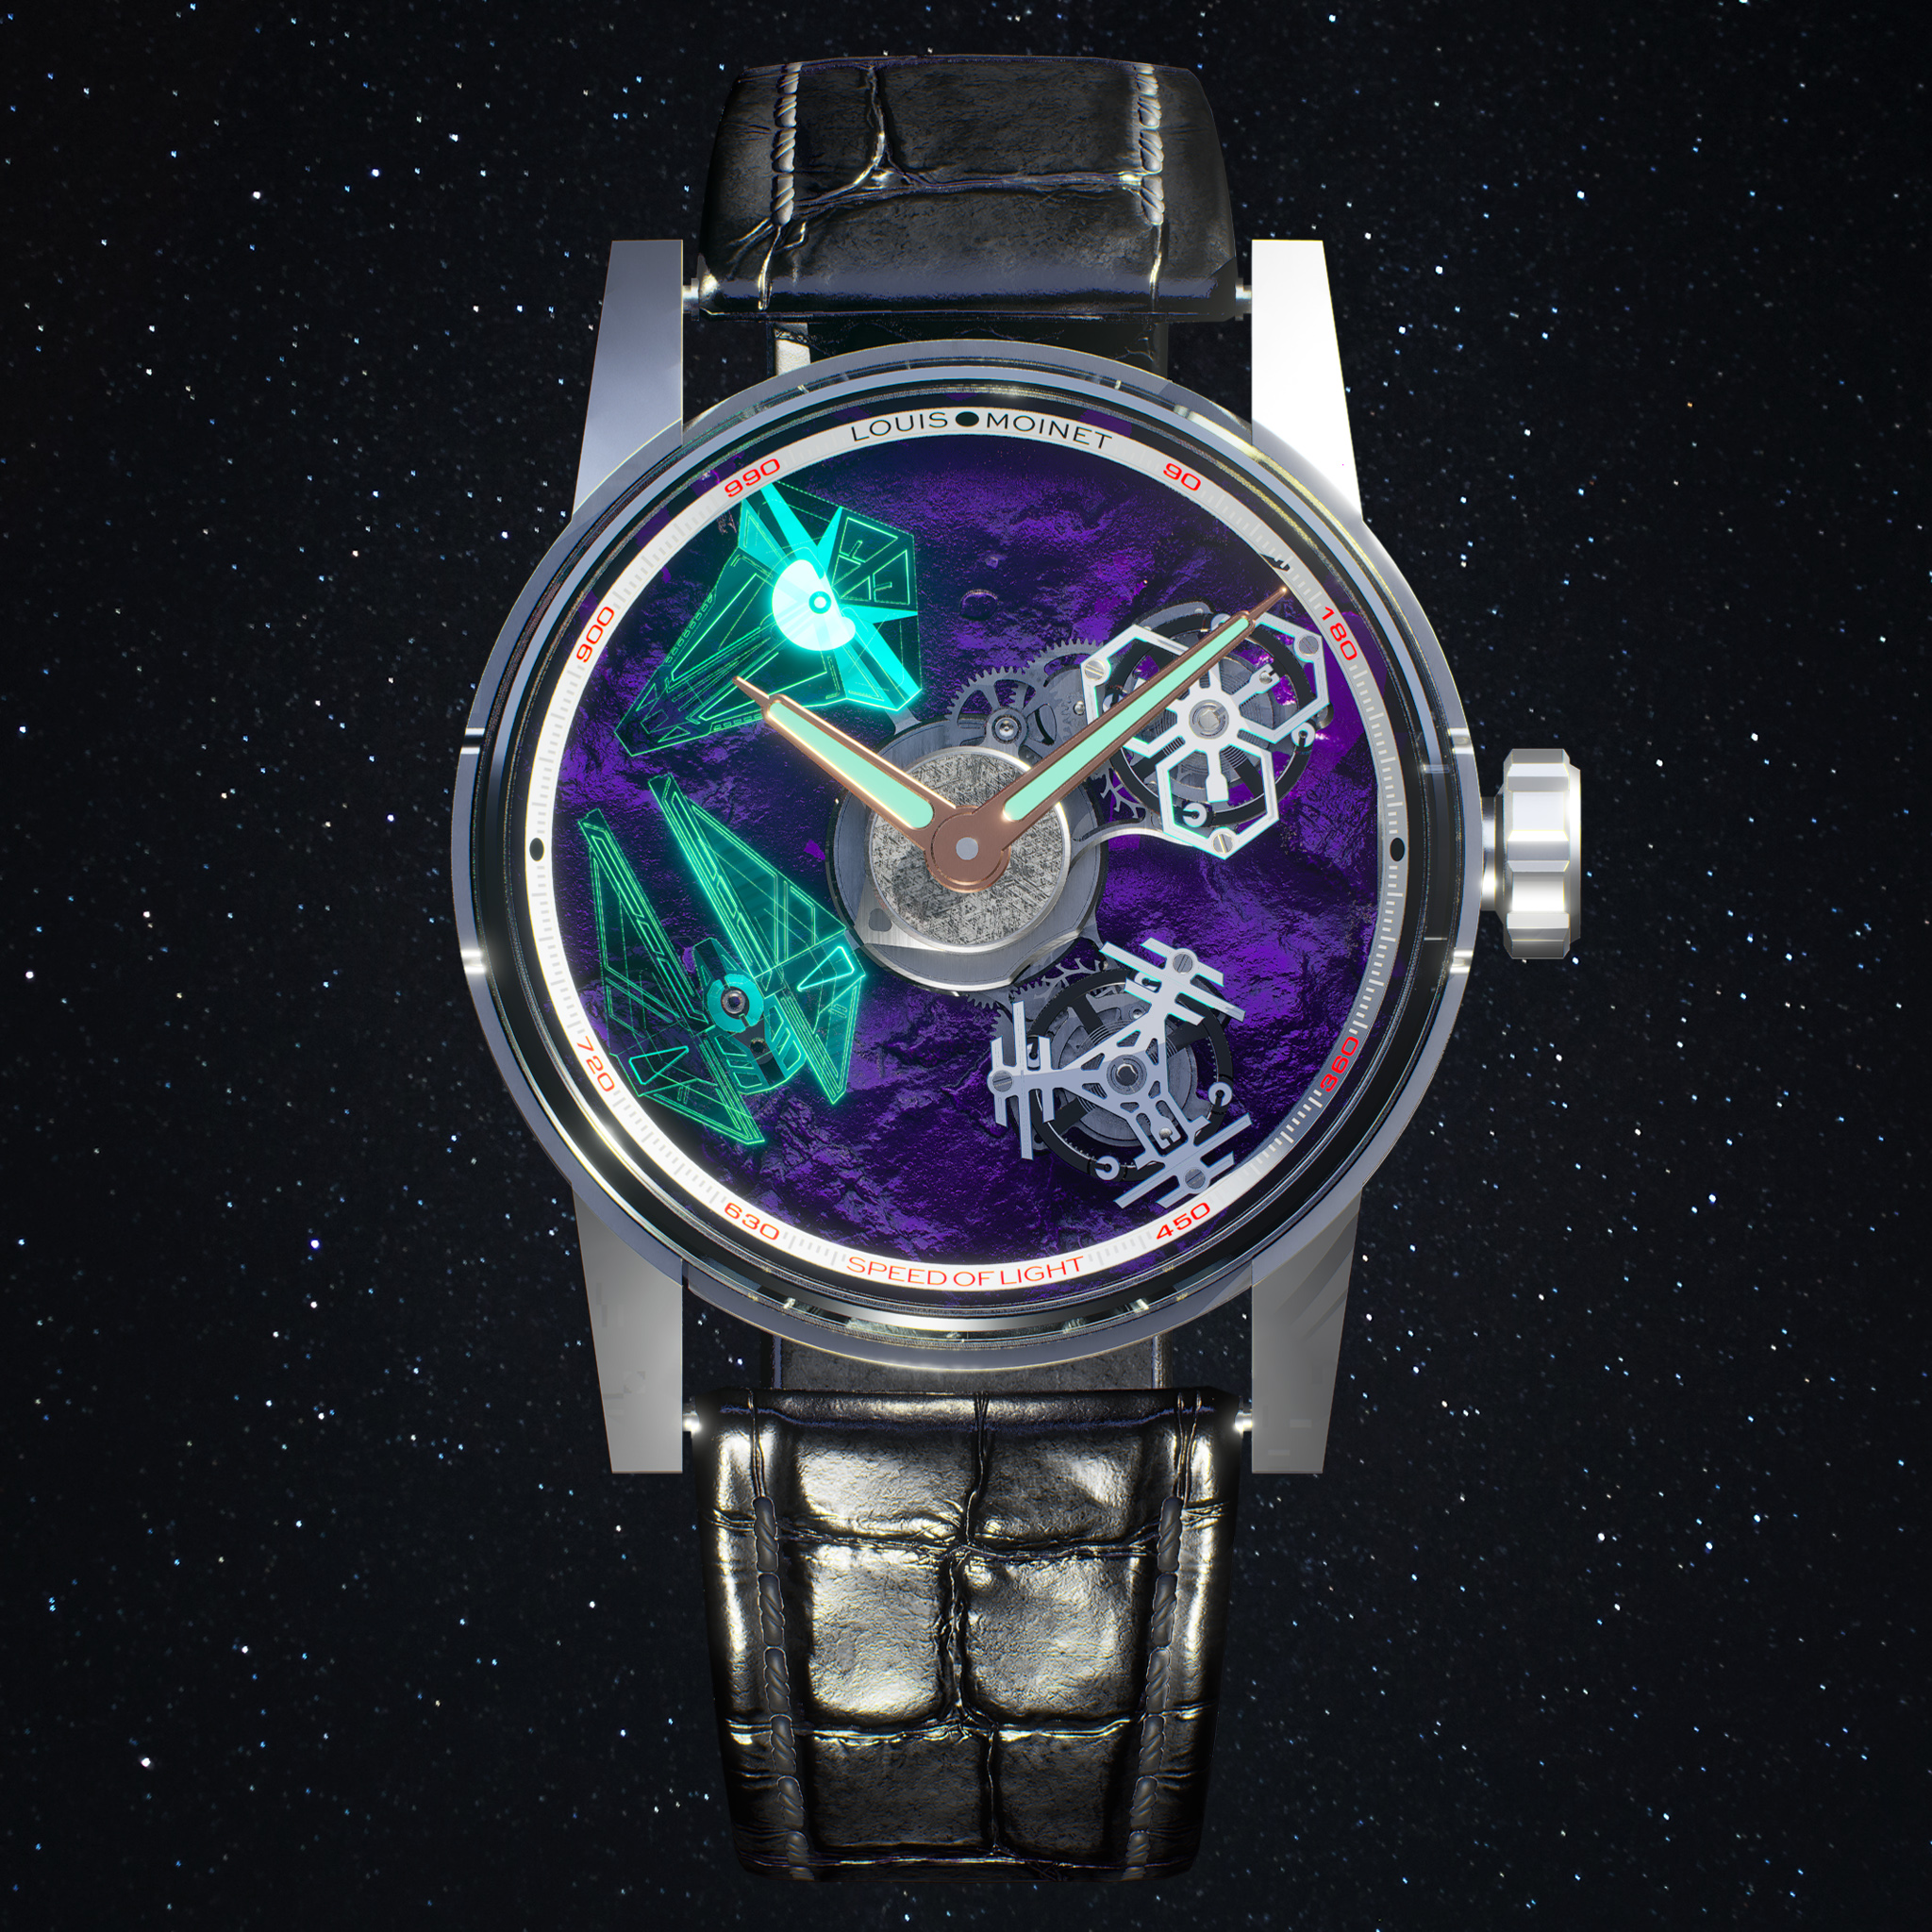 Louis Moinet hopes to sell 1,000 NFT avatars of its Space Revolution watch